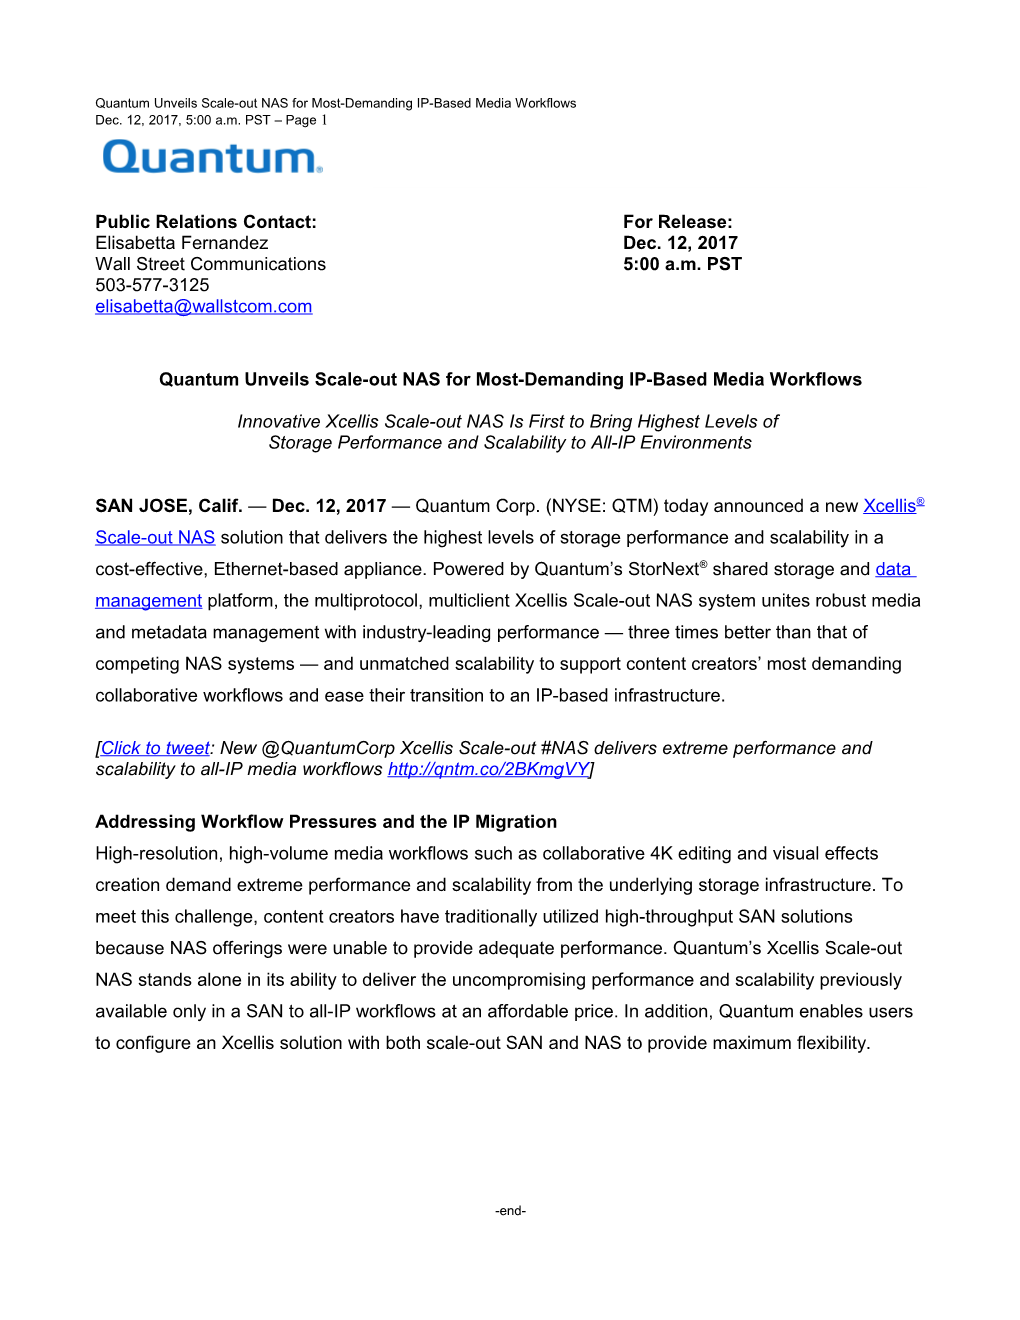 Quantum Unveils Scale-Out NAS for Most-Demanding IP-Based Media Workflows